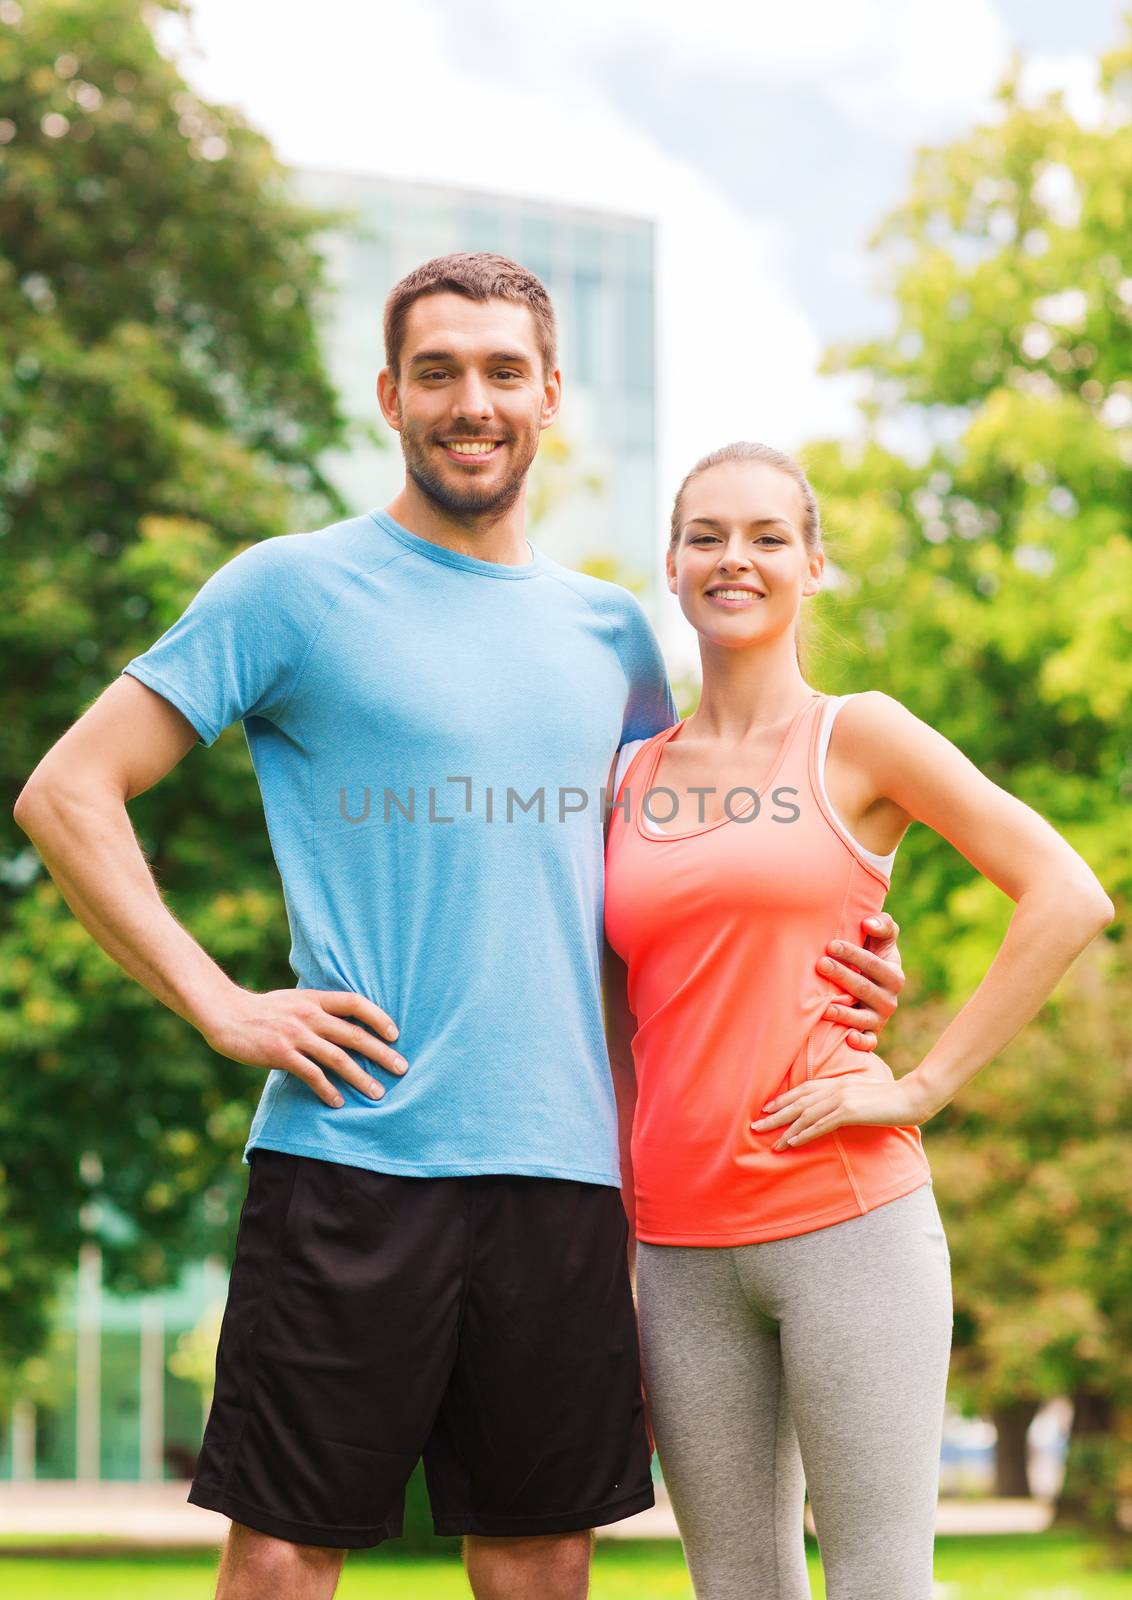 fitness, sport, friendship and lifestyle concept - smiling couple outdoors